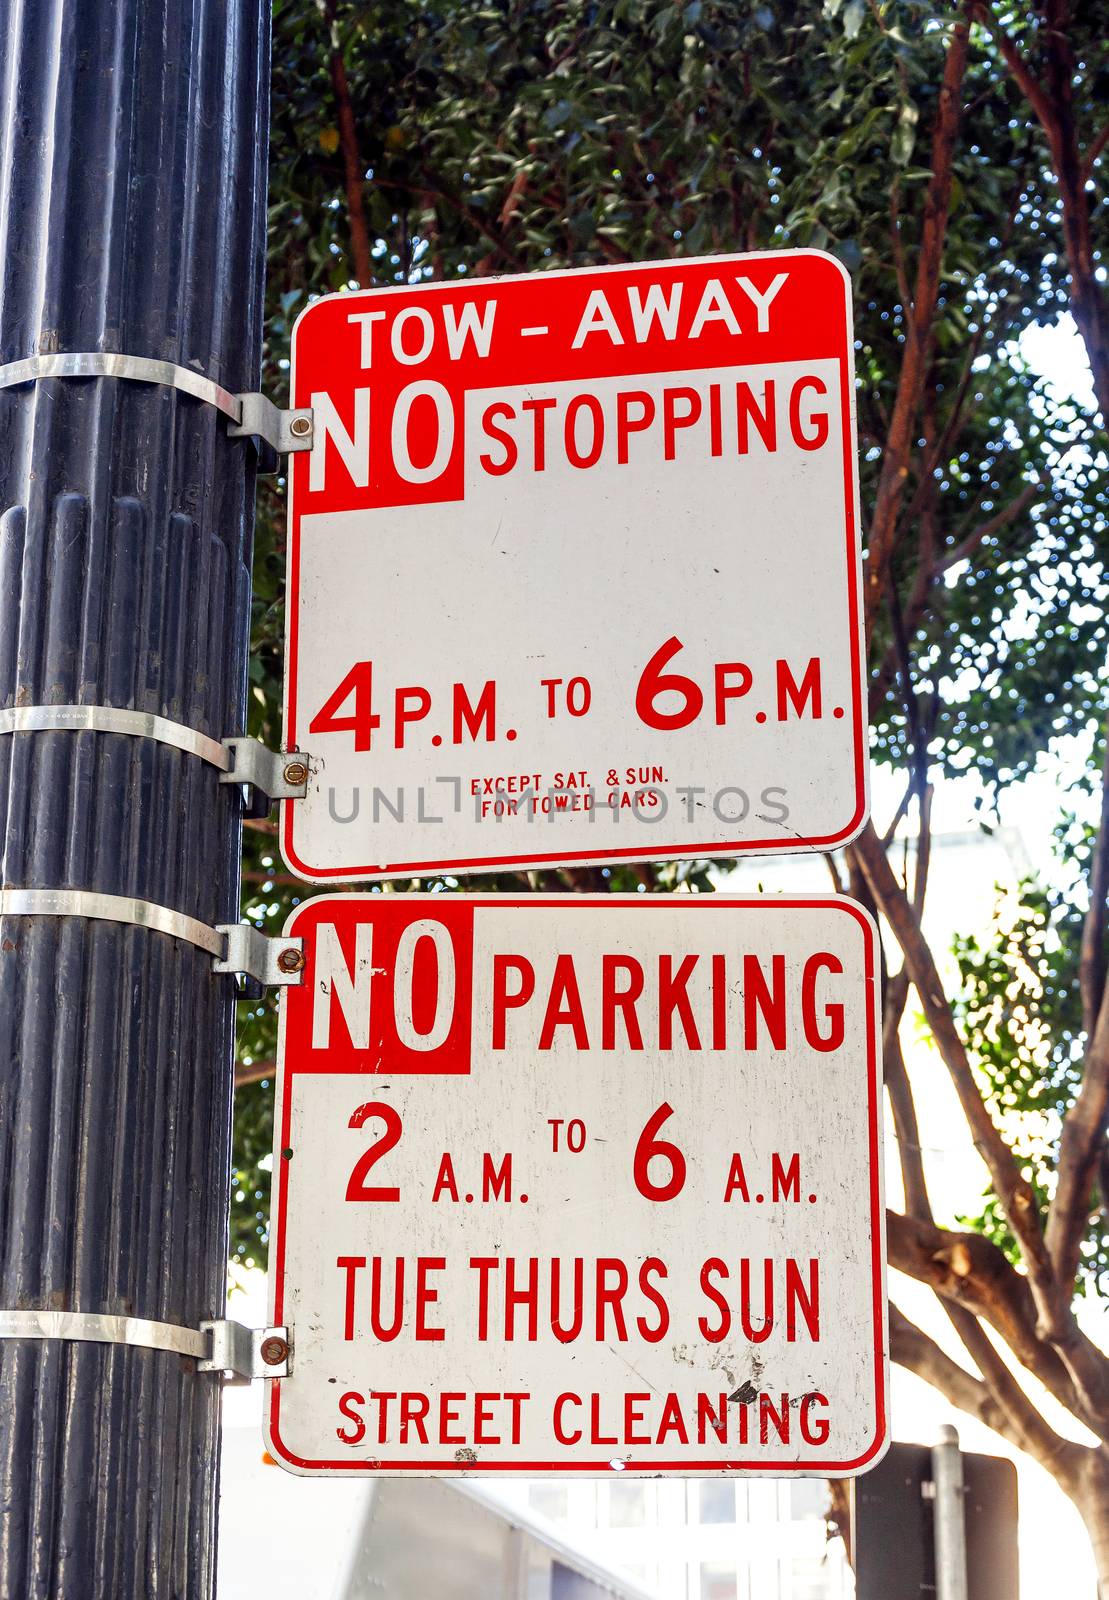 A parking sign in San Francisco